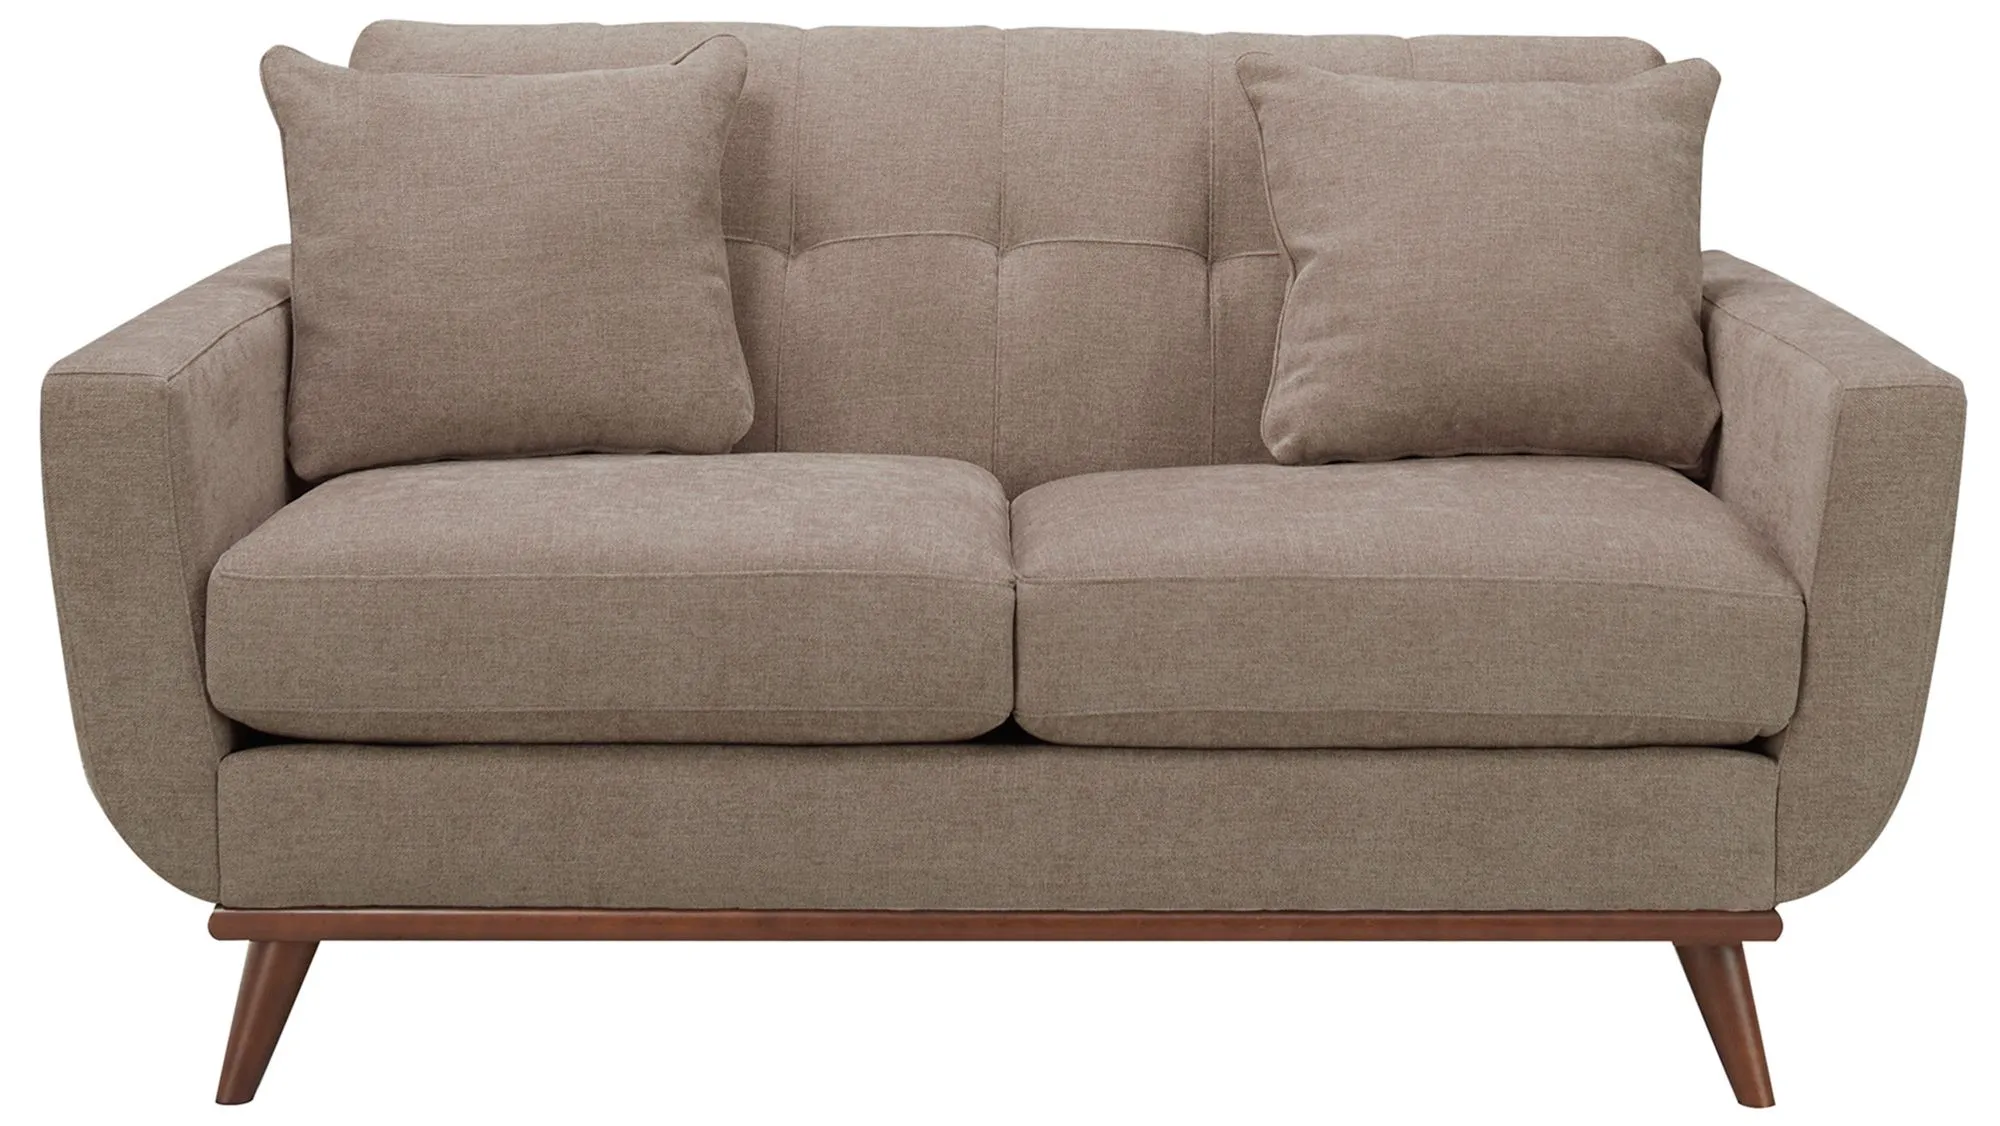 Milo Loveseat in Suede-So-Soft Mineral by H.M. Richards